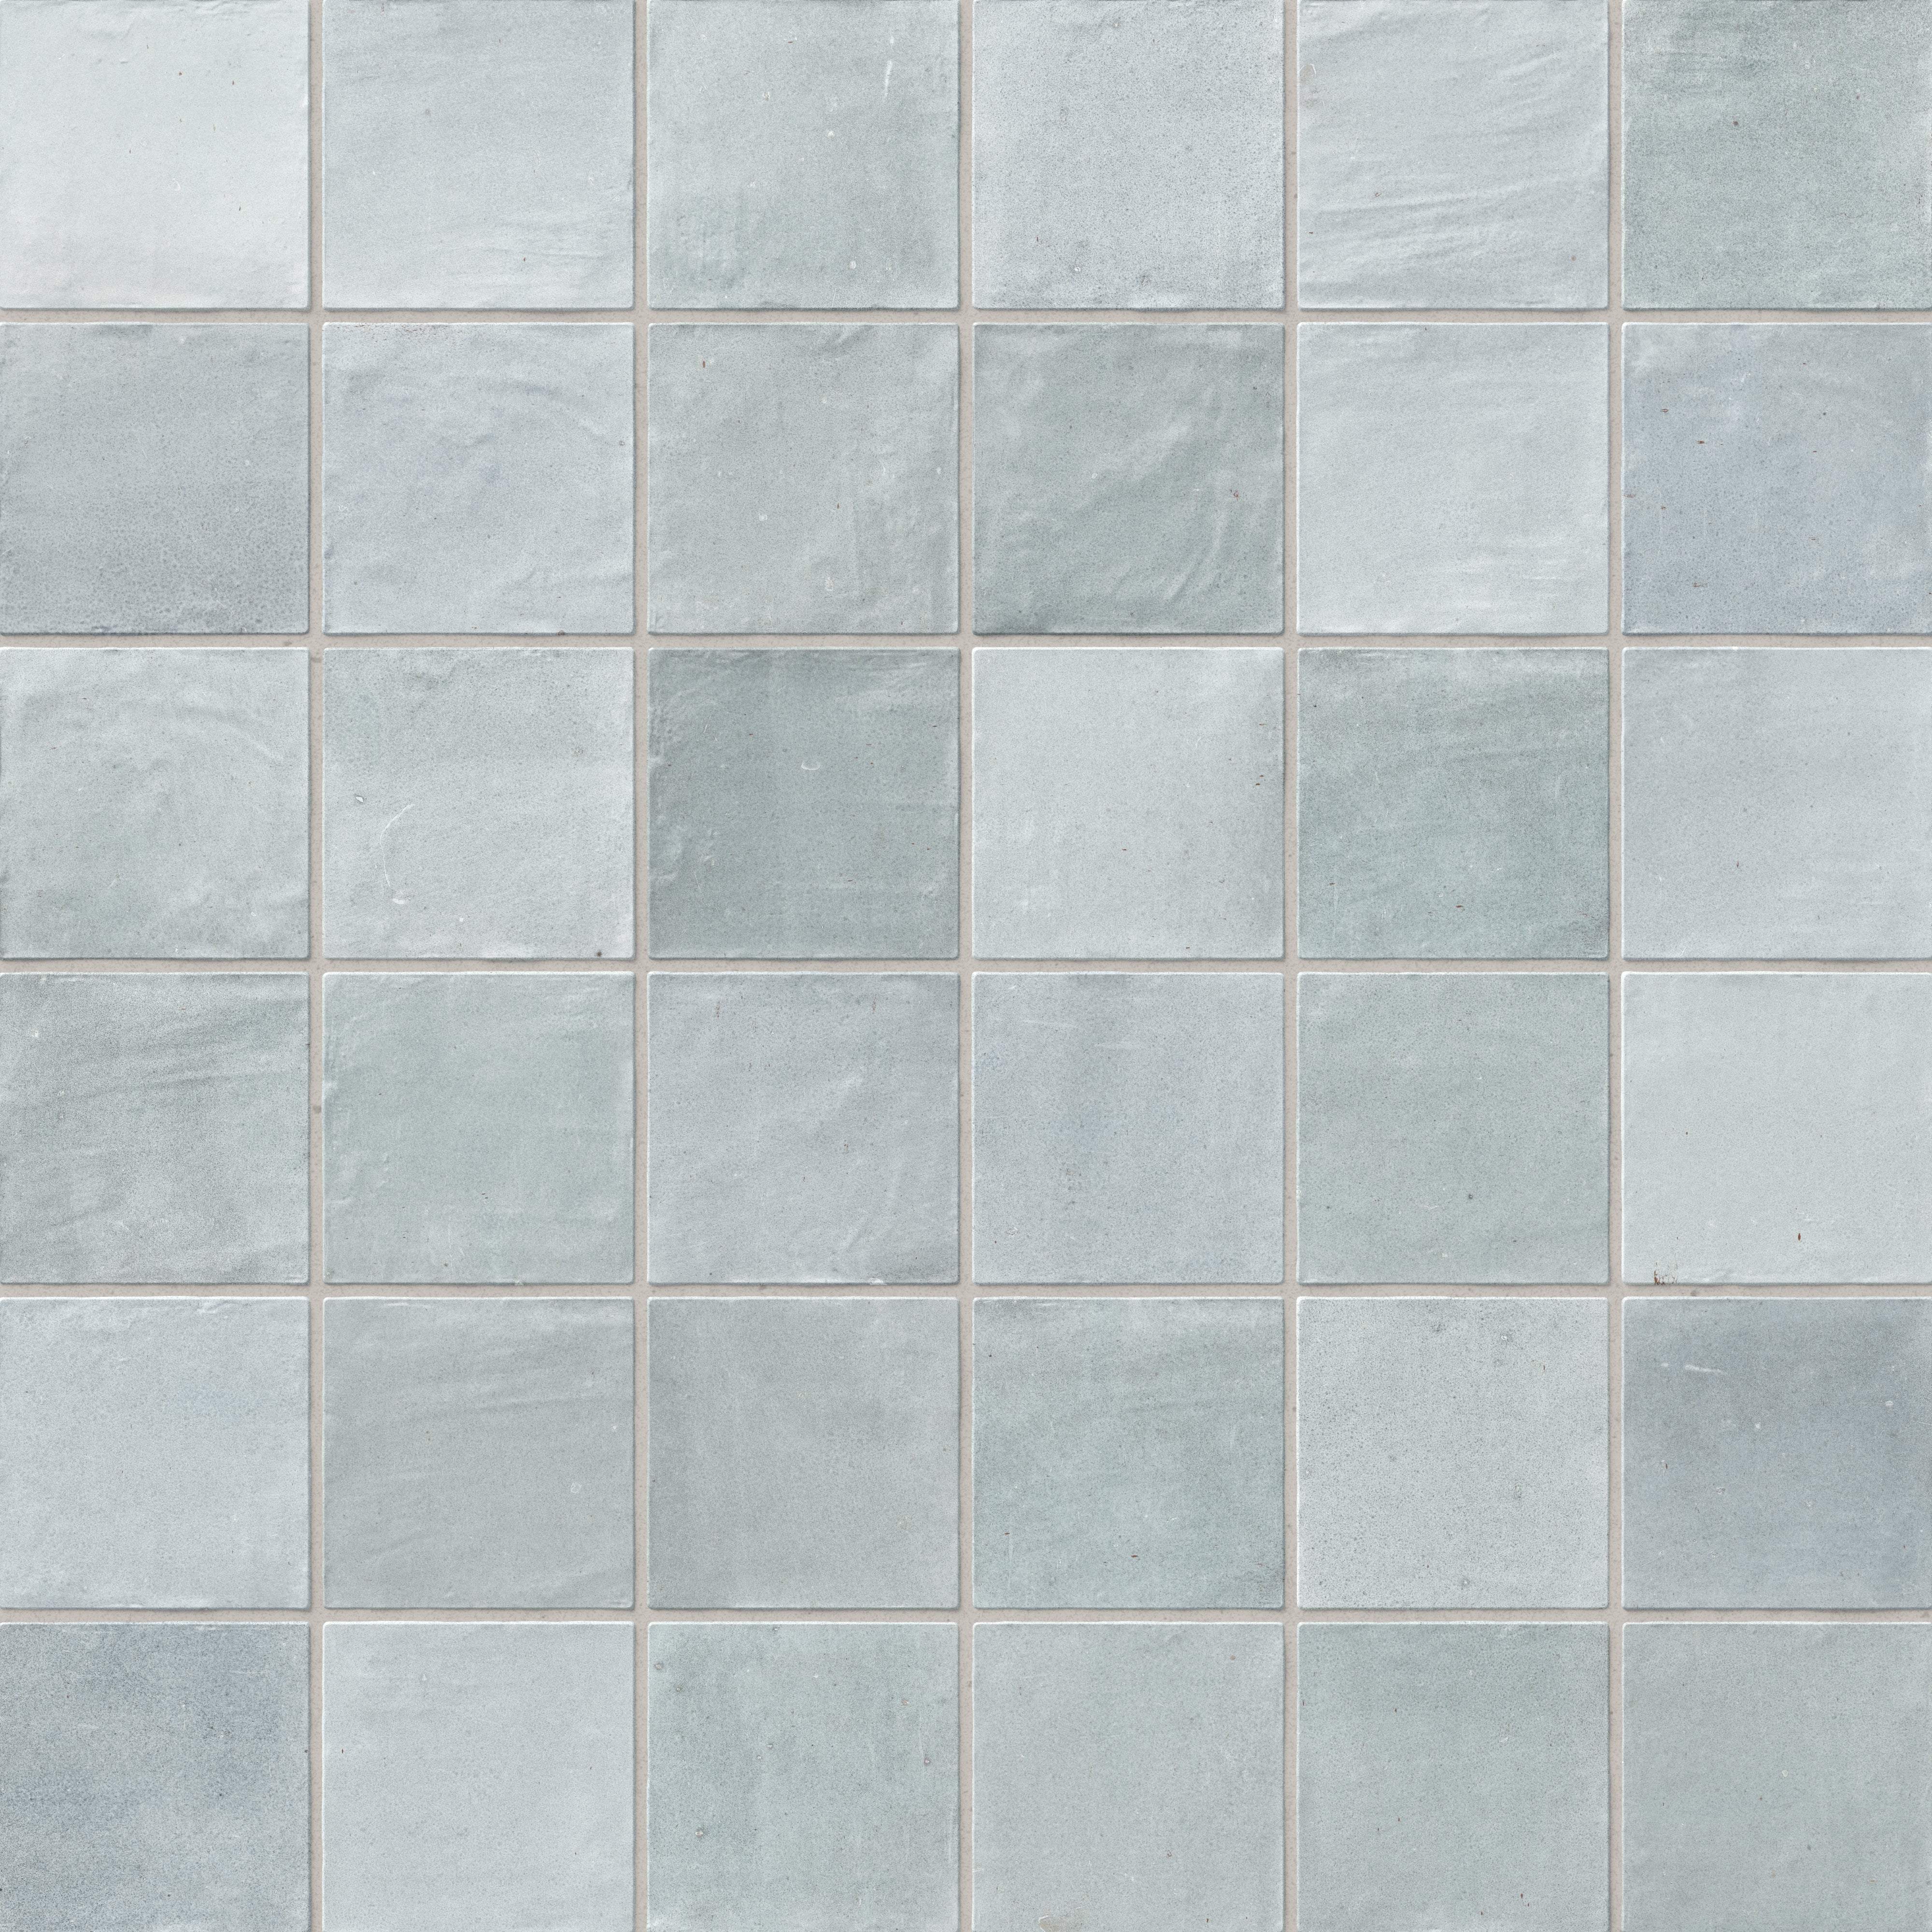 Everly 4x4 Matte Ceramic Tile in Ice